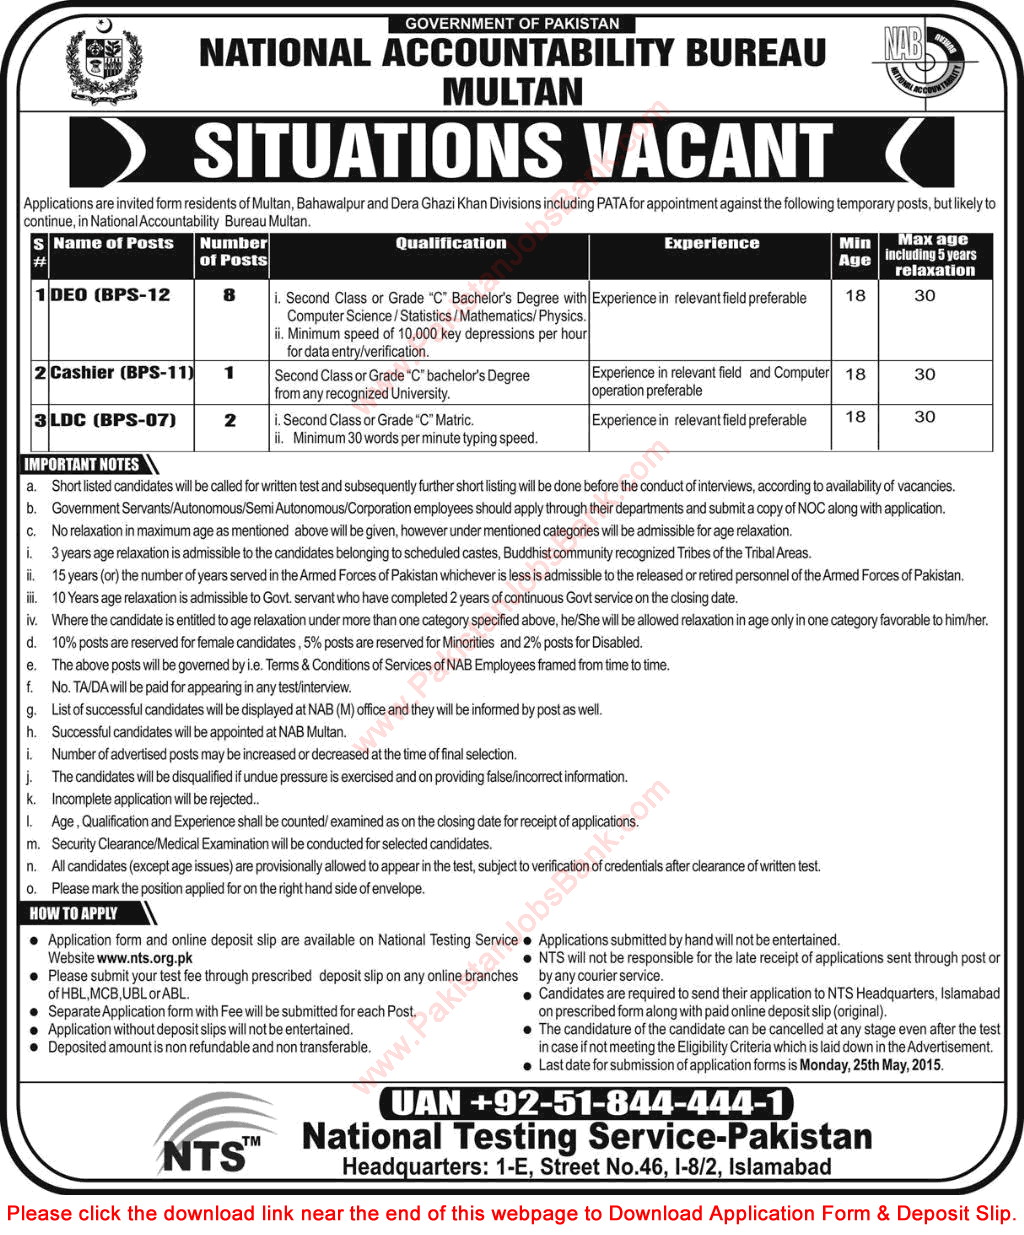 NAB Multan Jobs 2015 May NTS Application Form Download for DEO, LDC & Cashier Latest